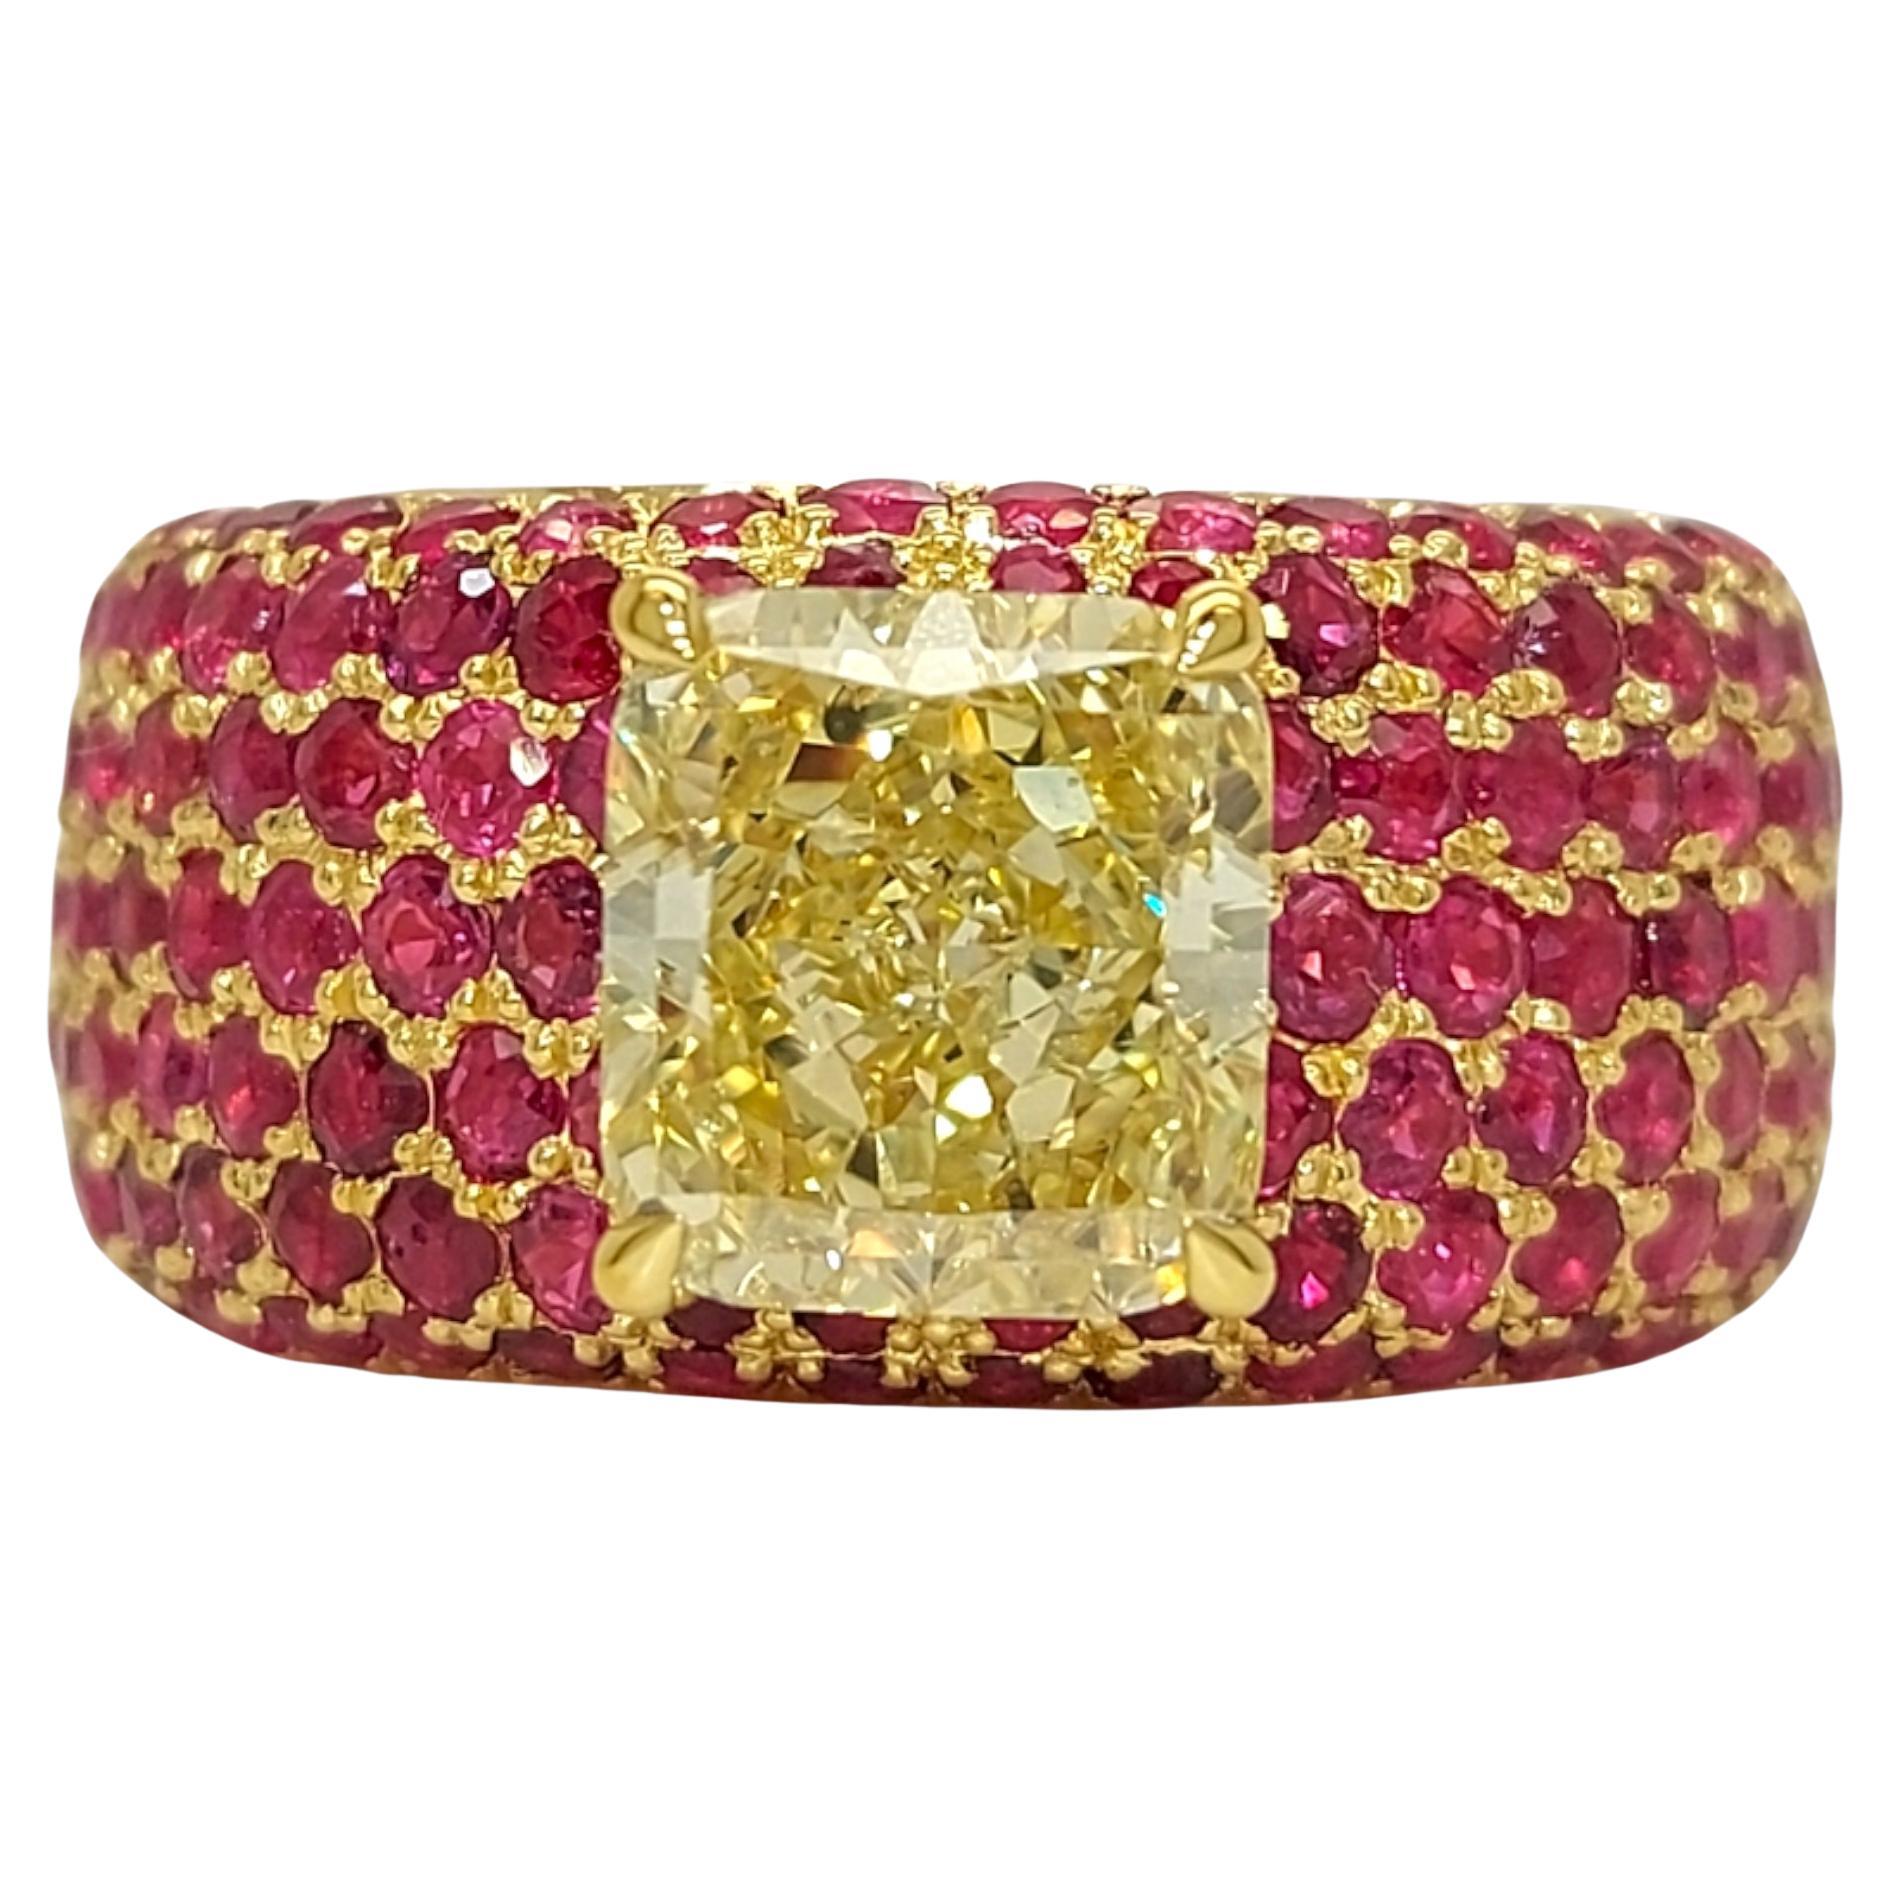 GIA Certified 18kt Gold Ring with 3.06ct Fancy Yellow Diamond & 9.07ct Ruby